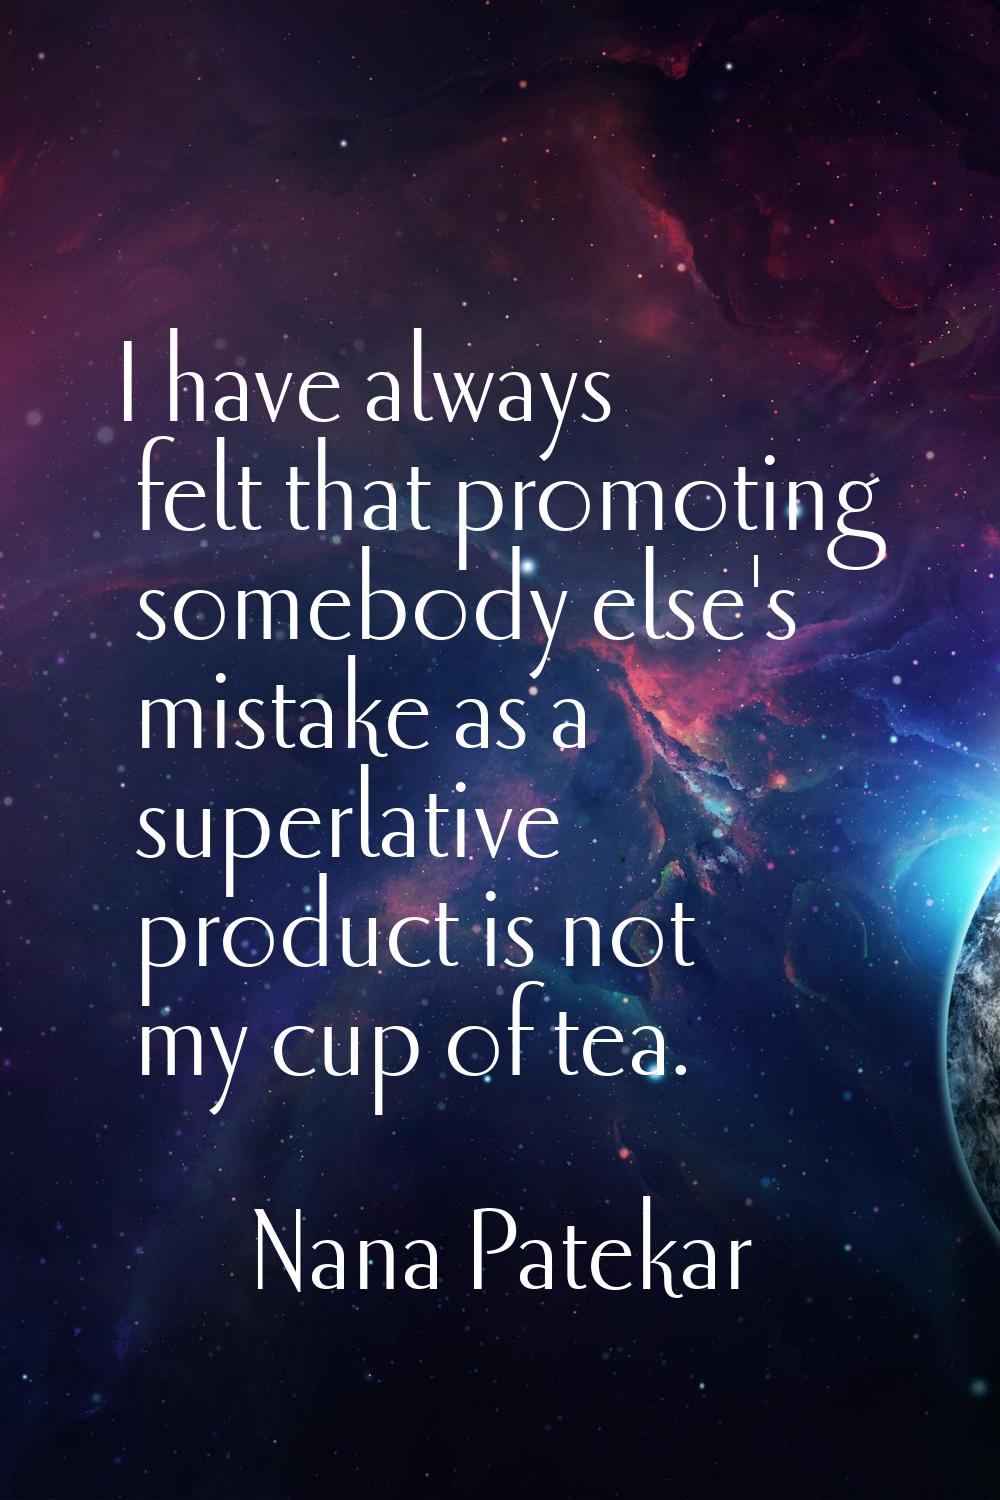 I have always felt that promoting somebody else's mistake as a superlative product is not my cup of